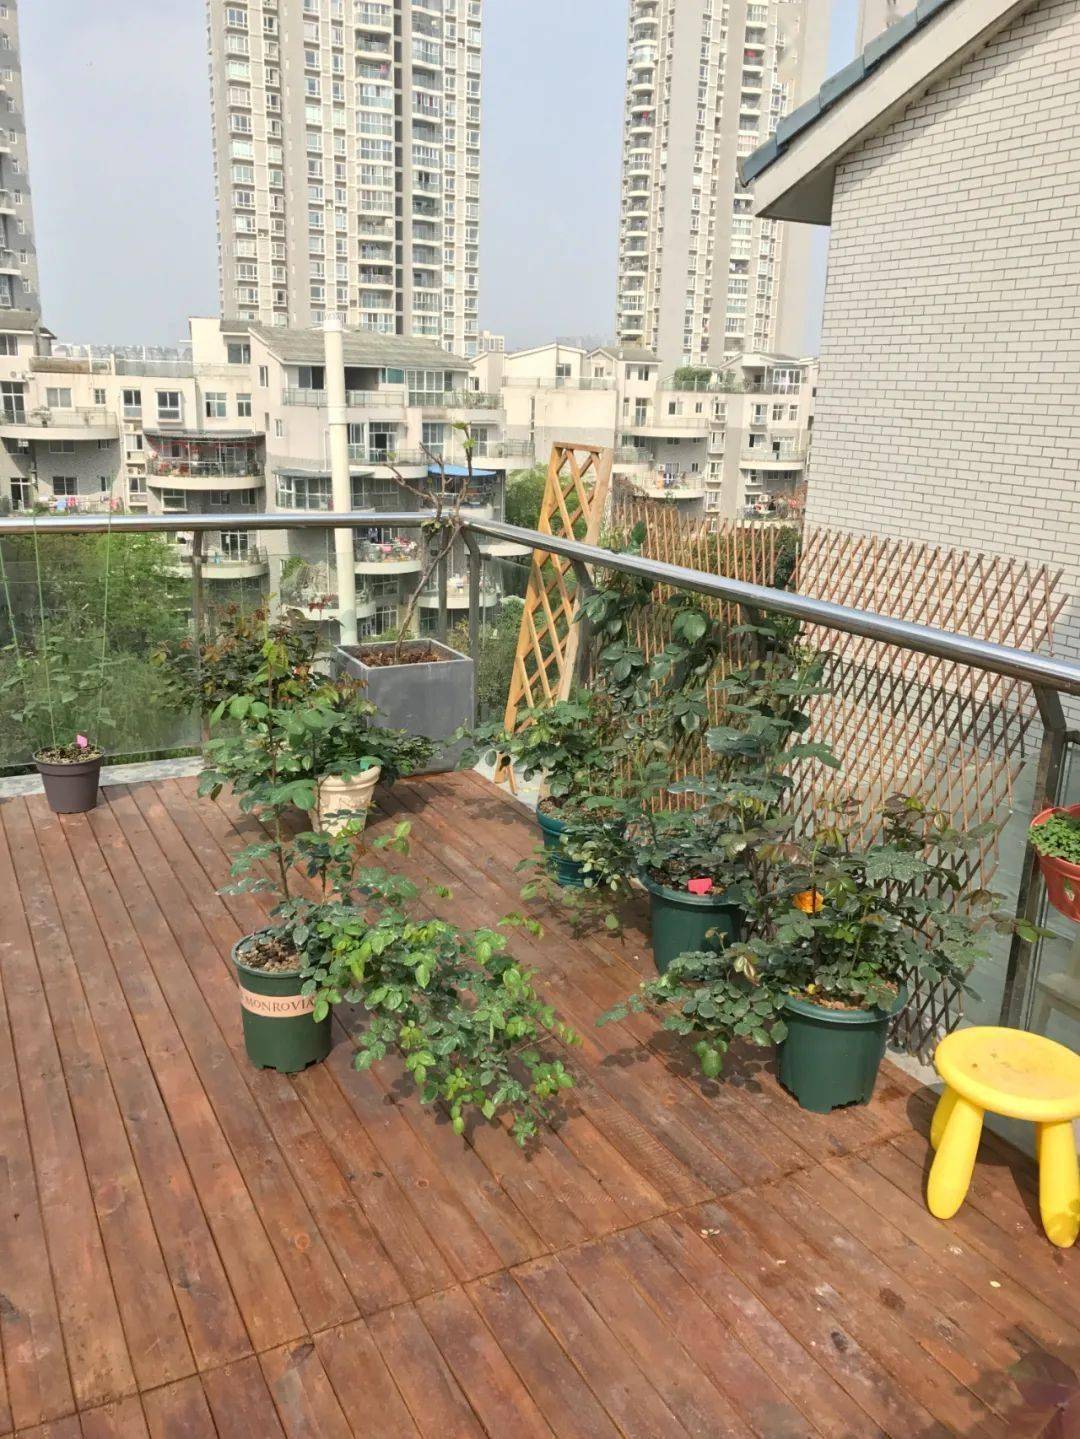 The young couple decided to buy a house with a terrace to make a vegetable garden, but after 4 years it turned into a colorful flower garden - Photo 2.